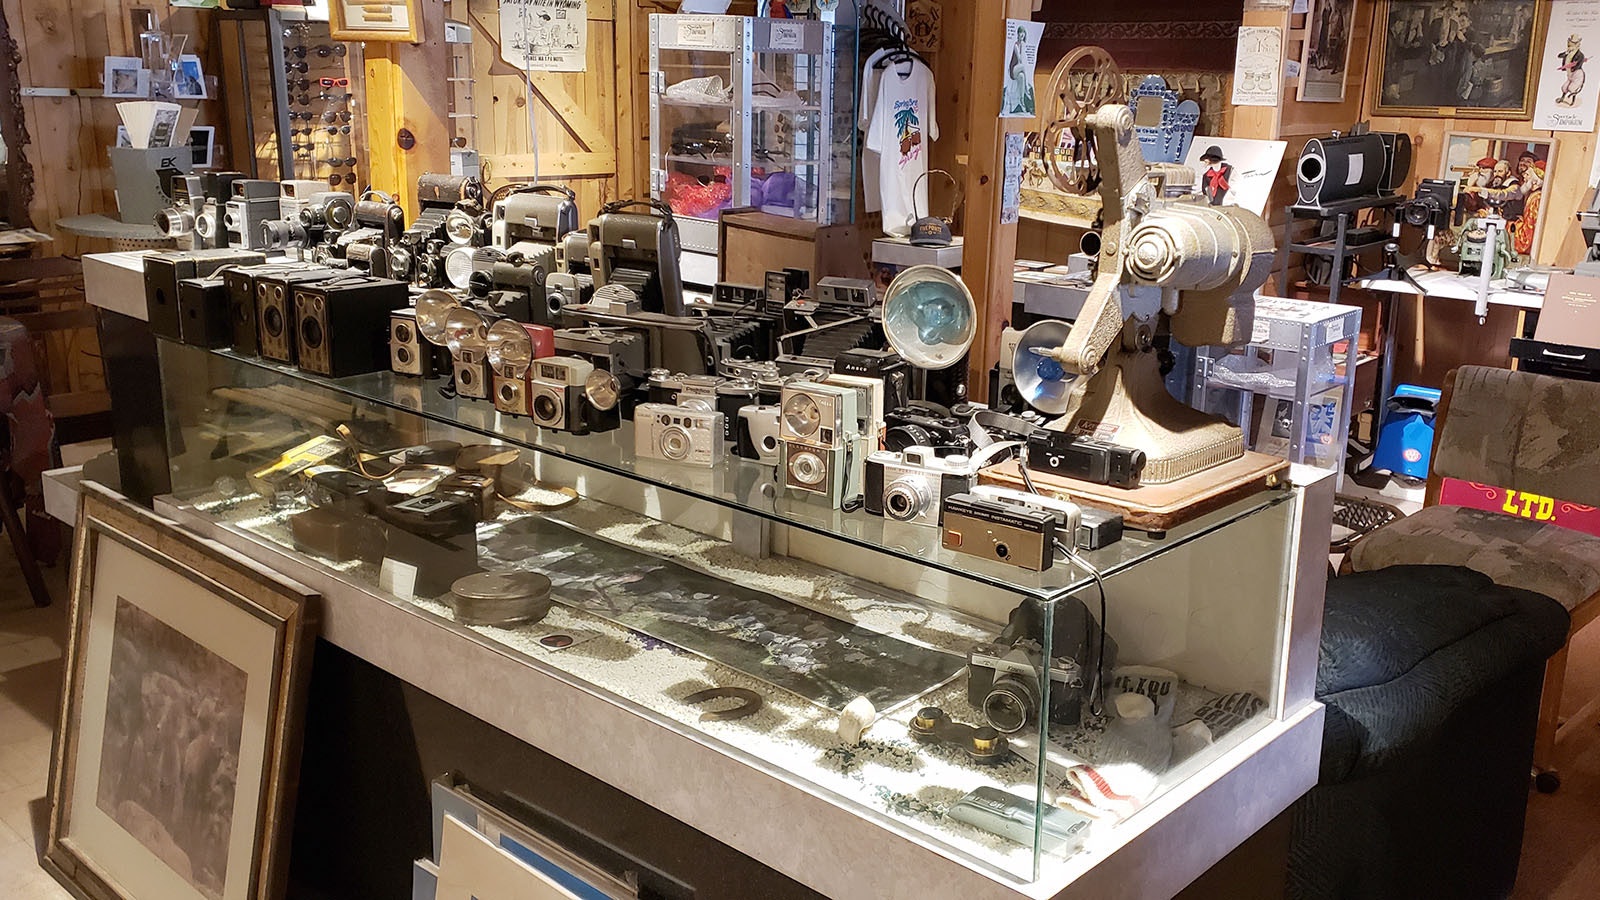 All things with lenses are on display at the Spectacle Emporium in Downtown Laramie, like these vintage cameras.